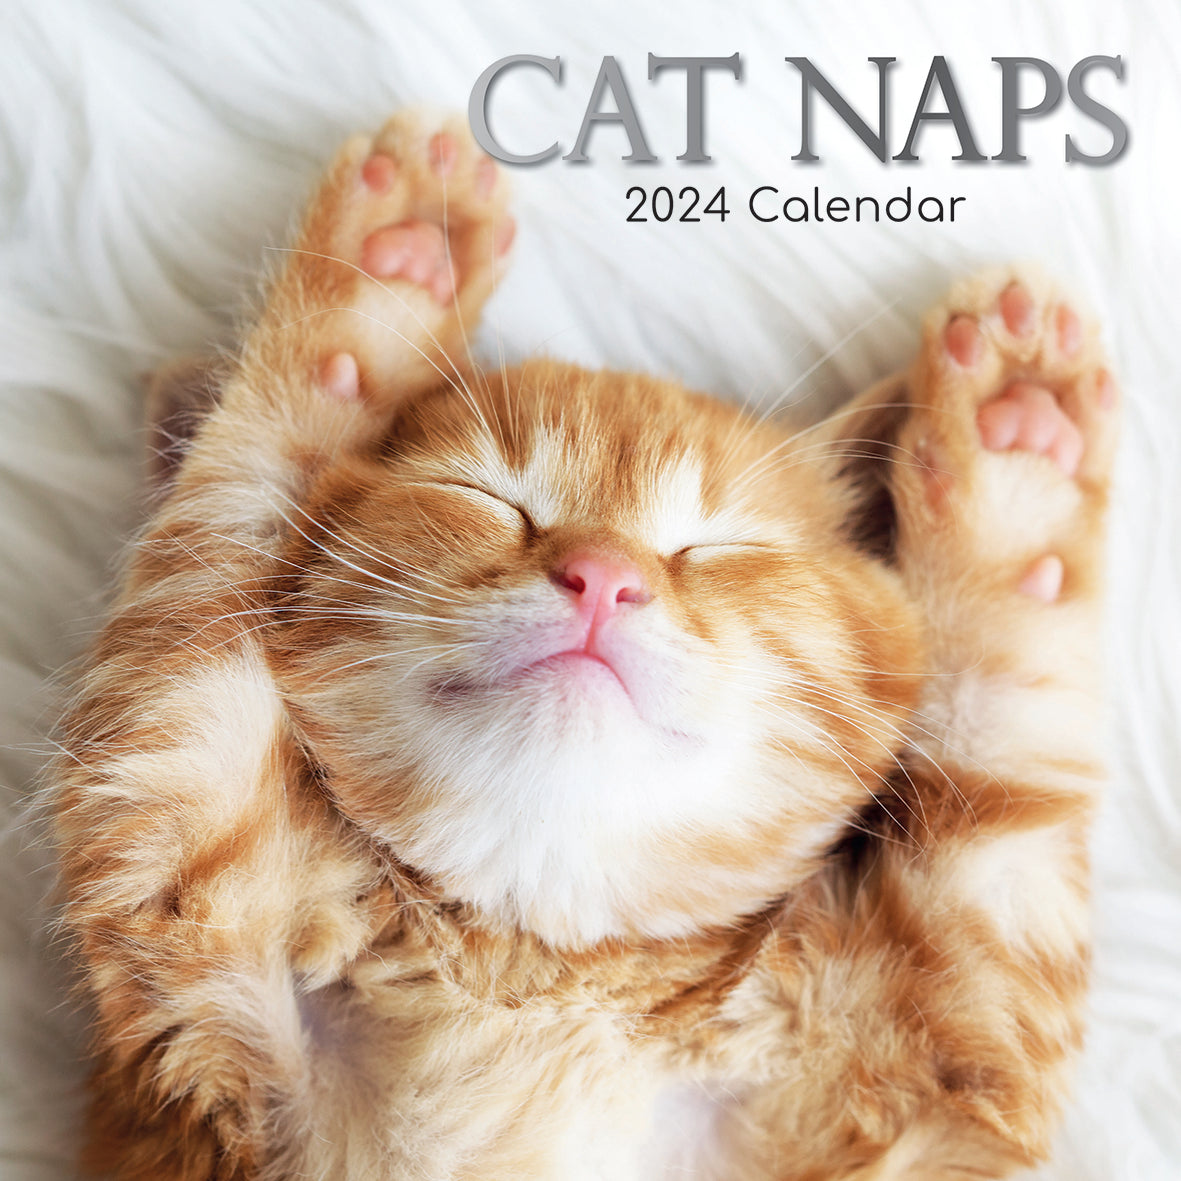 2024 Cat Naps Square Wall Calendar Cats & Kittens Calendars by The